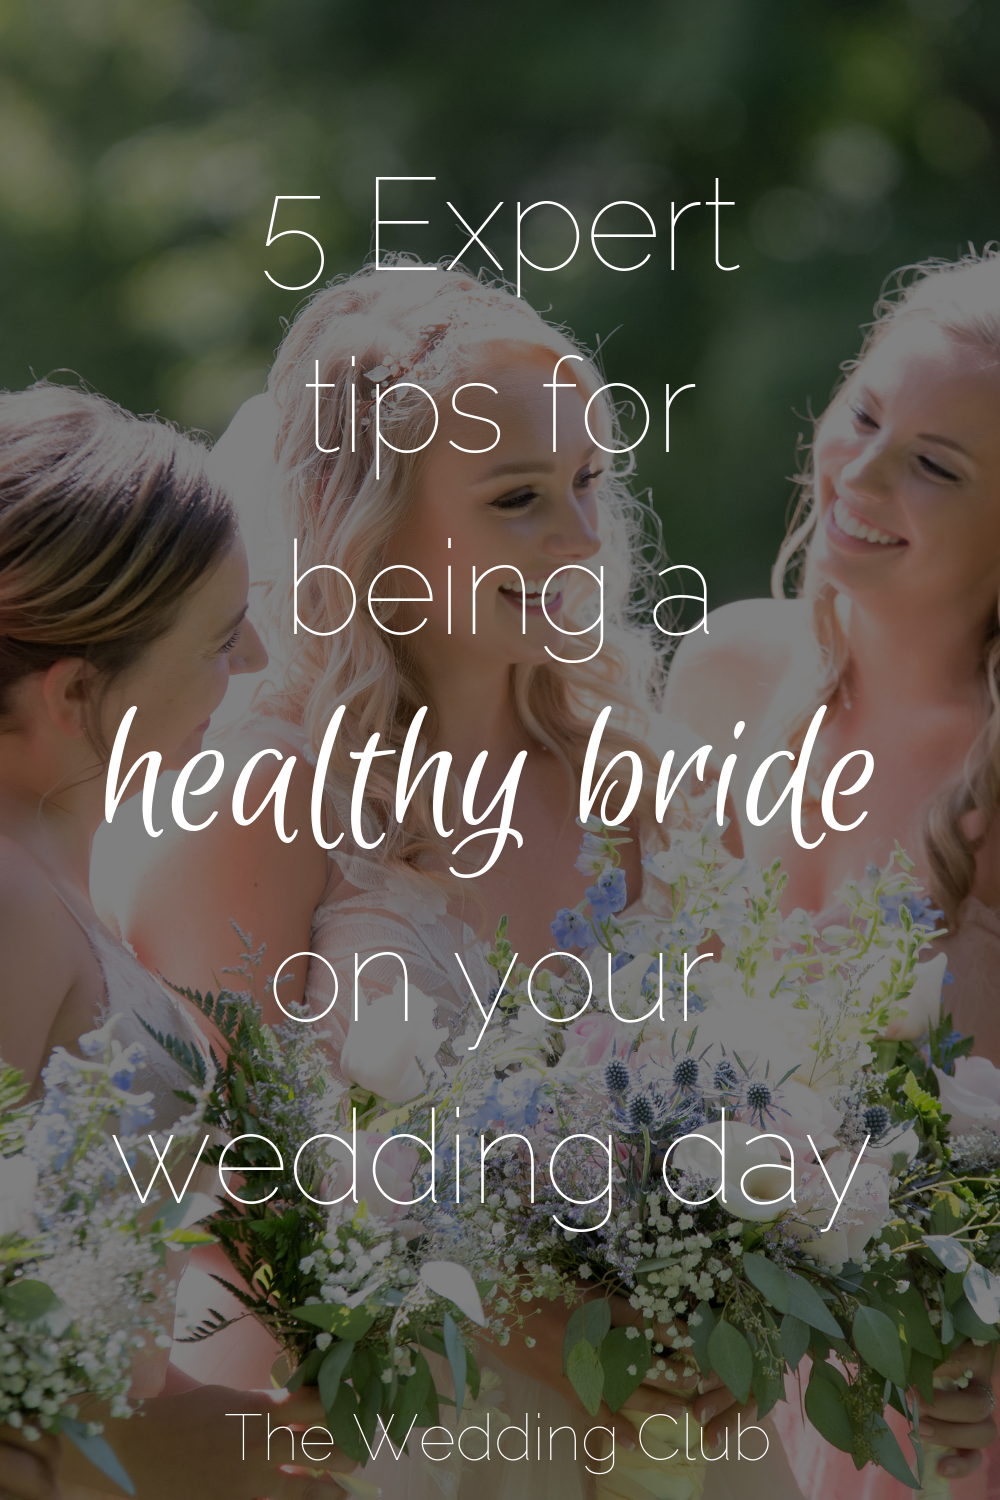 5+ Expert tips for being a healthy bride on your wedding day